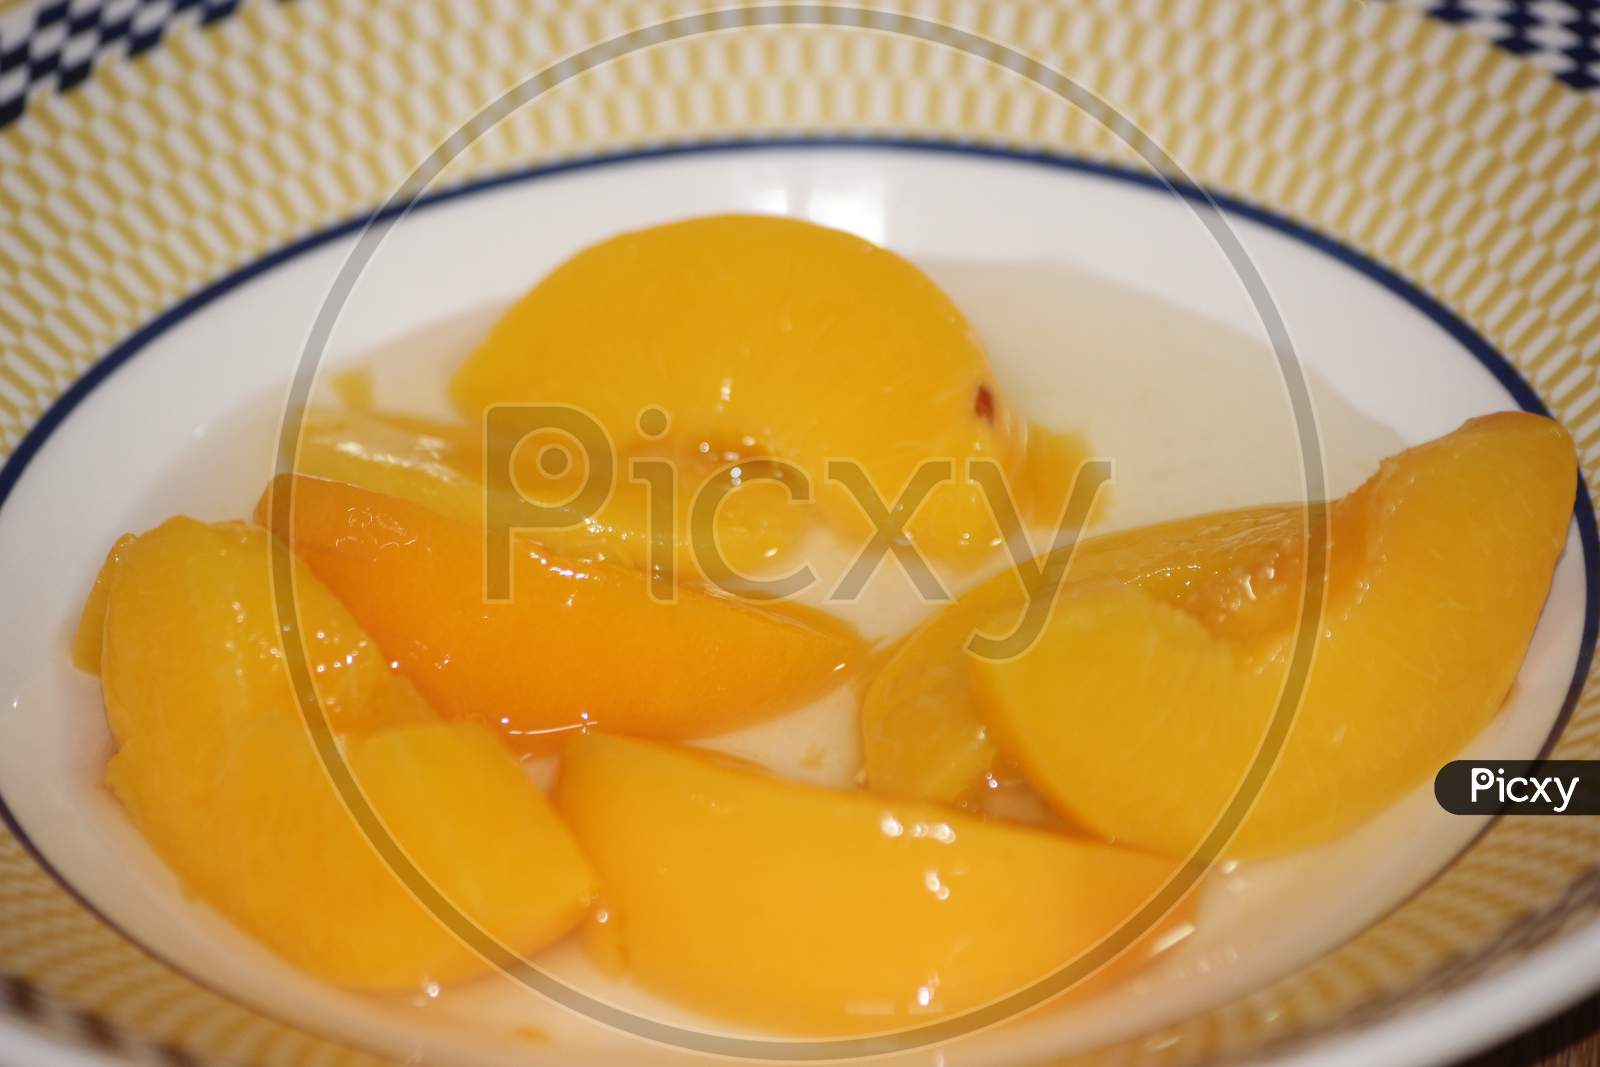 Canned Peaches Halves Sprinkled With Syrup In White Plate.